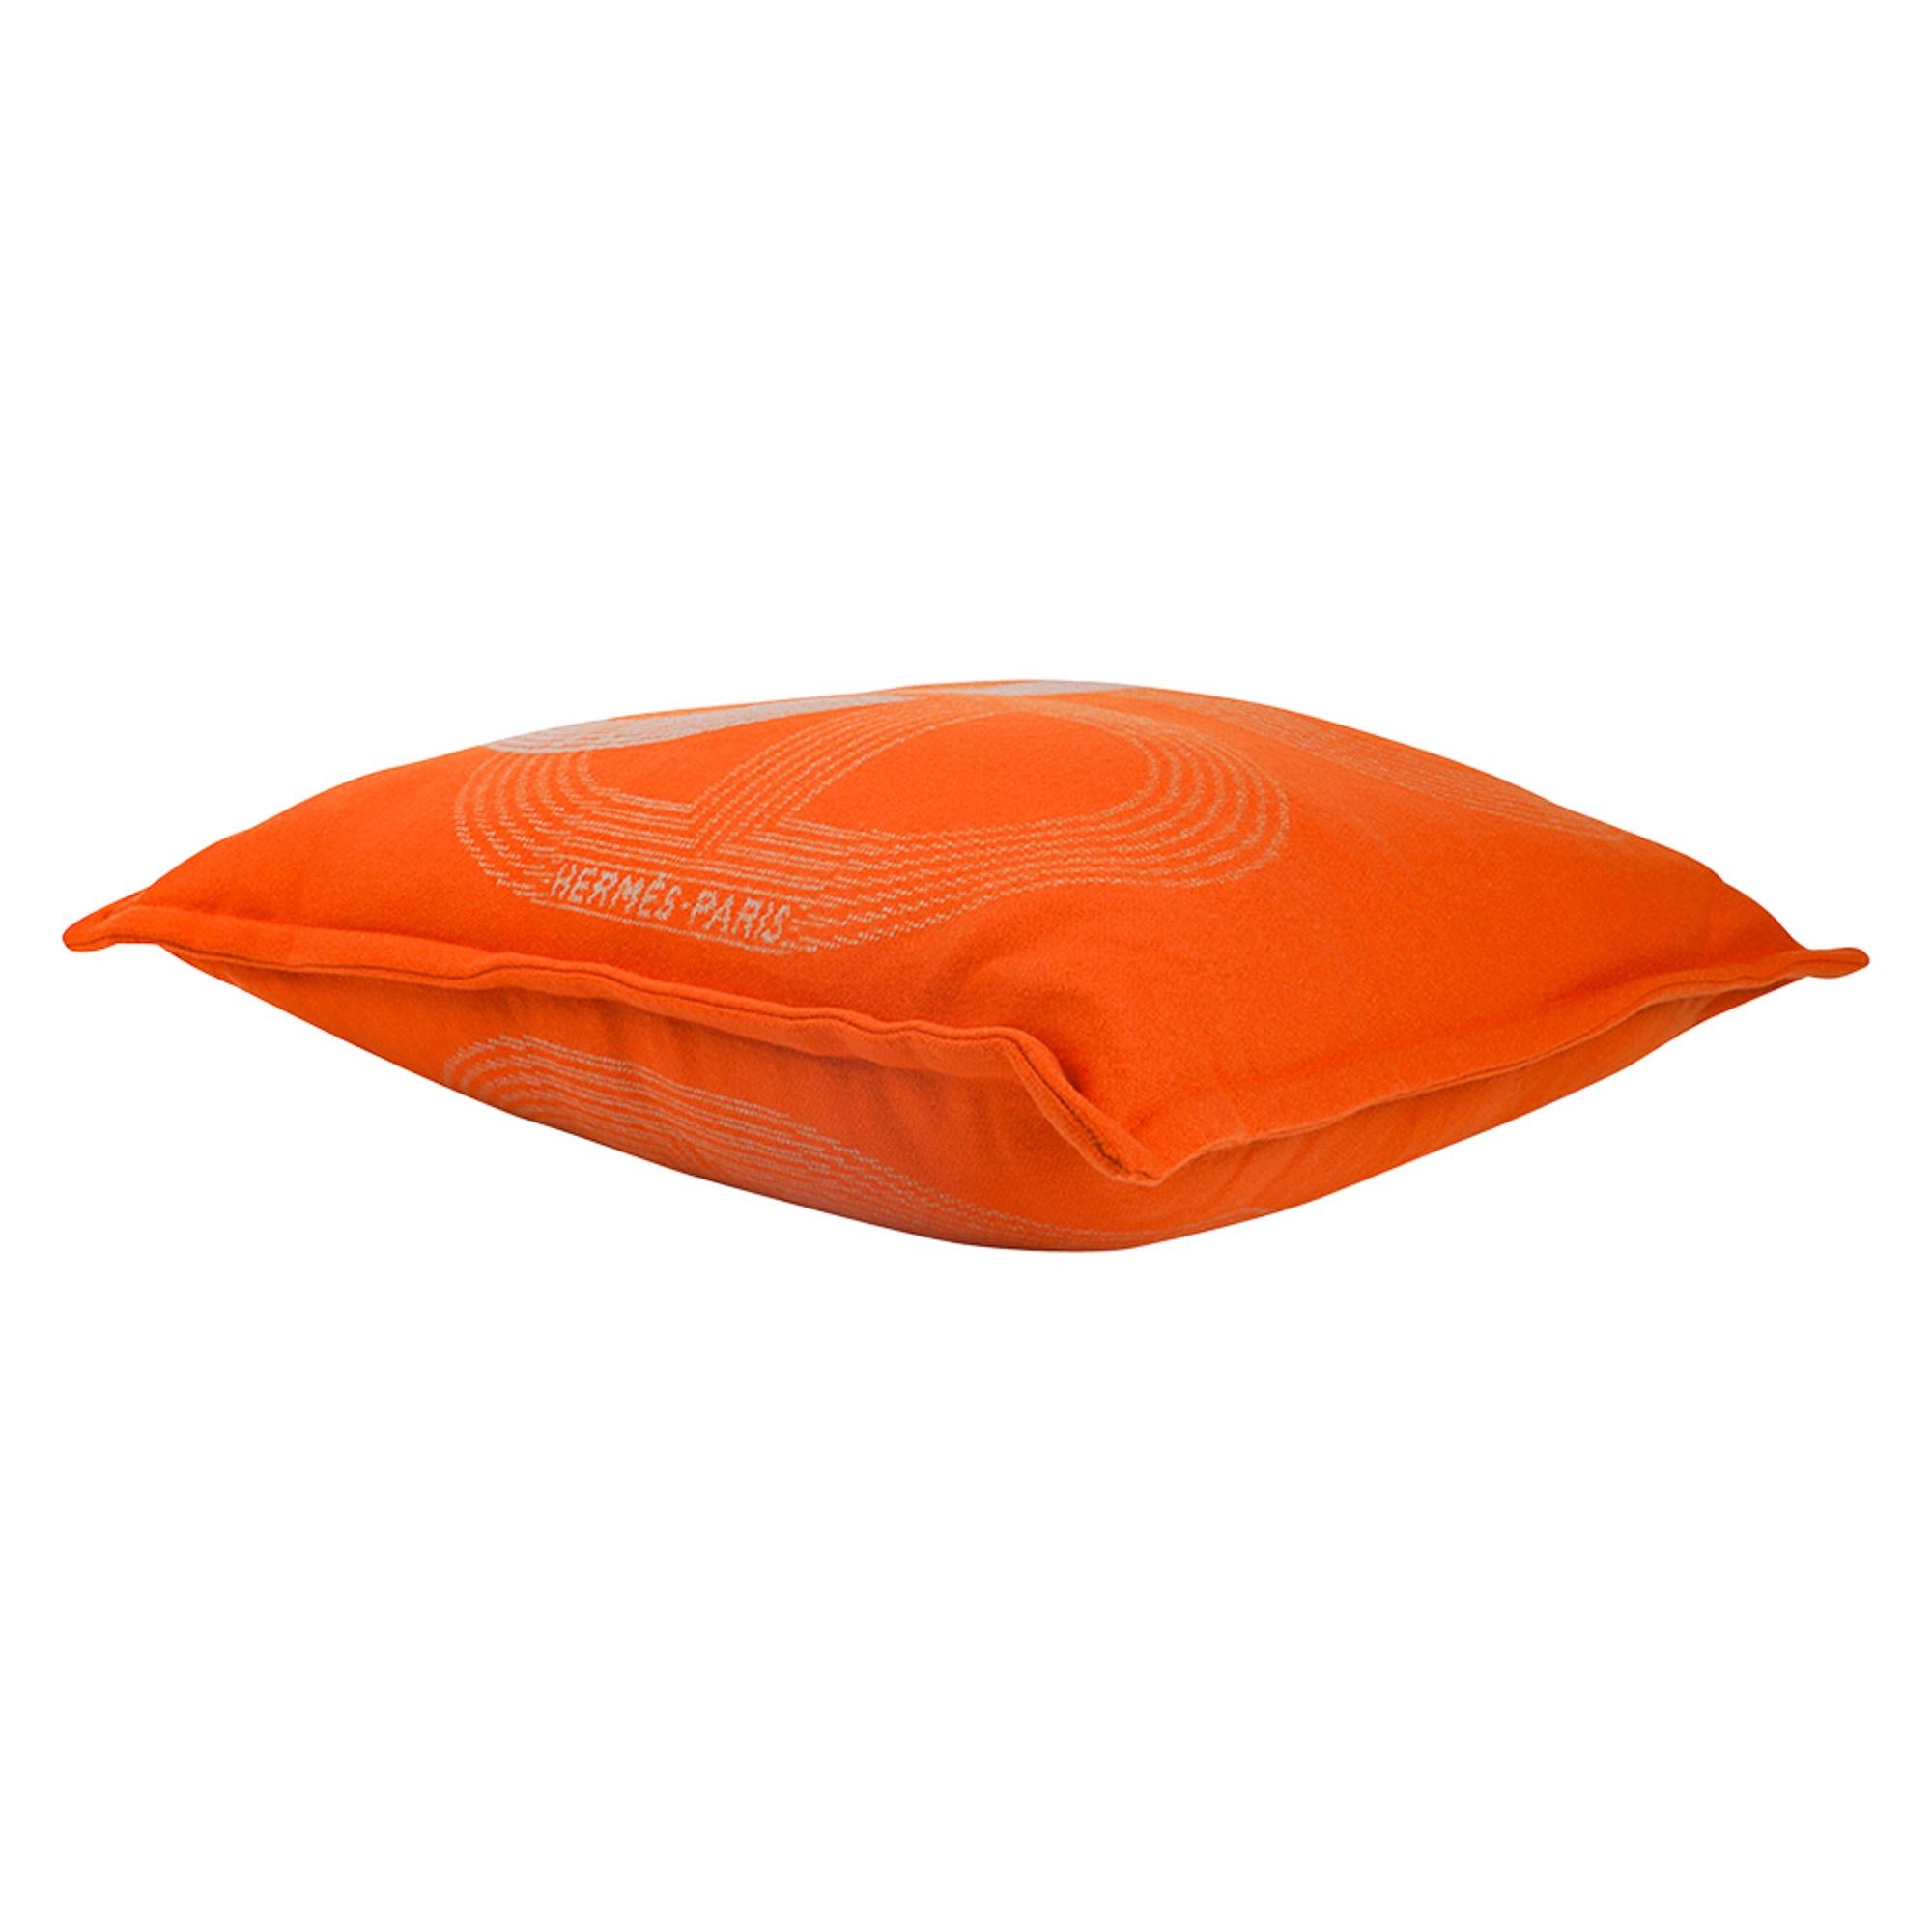 Red Hermes Circuit 24 Pillow Orange / Sable Marino Wool New For Sale